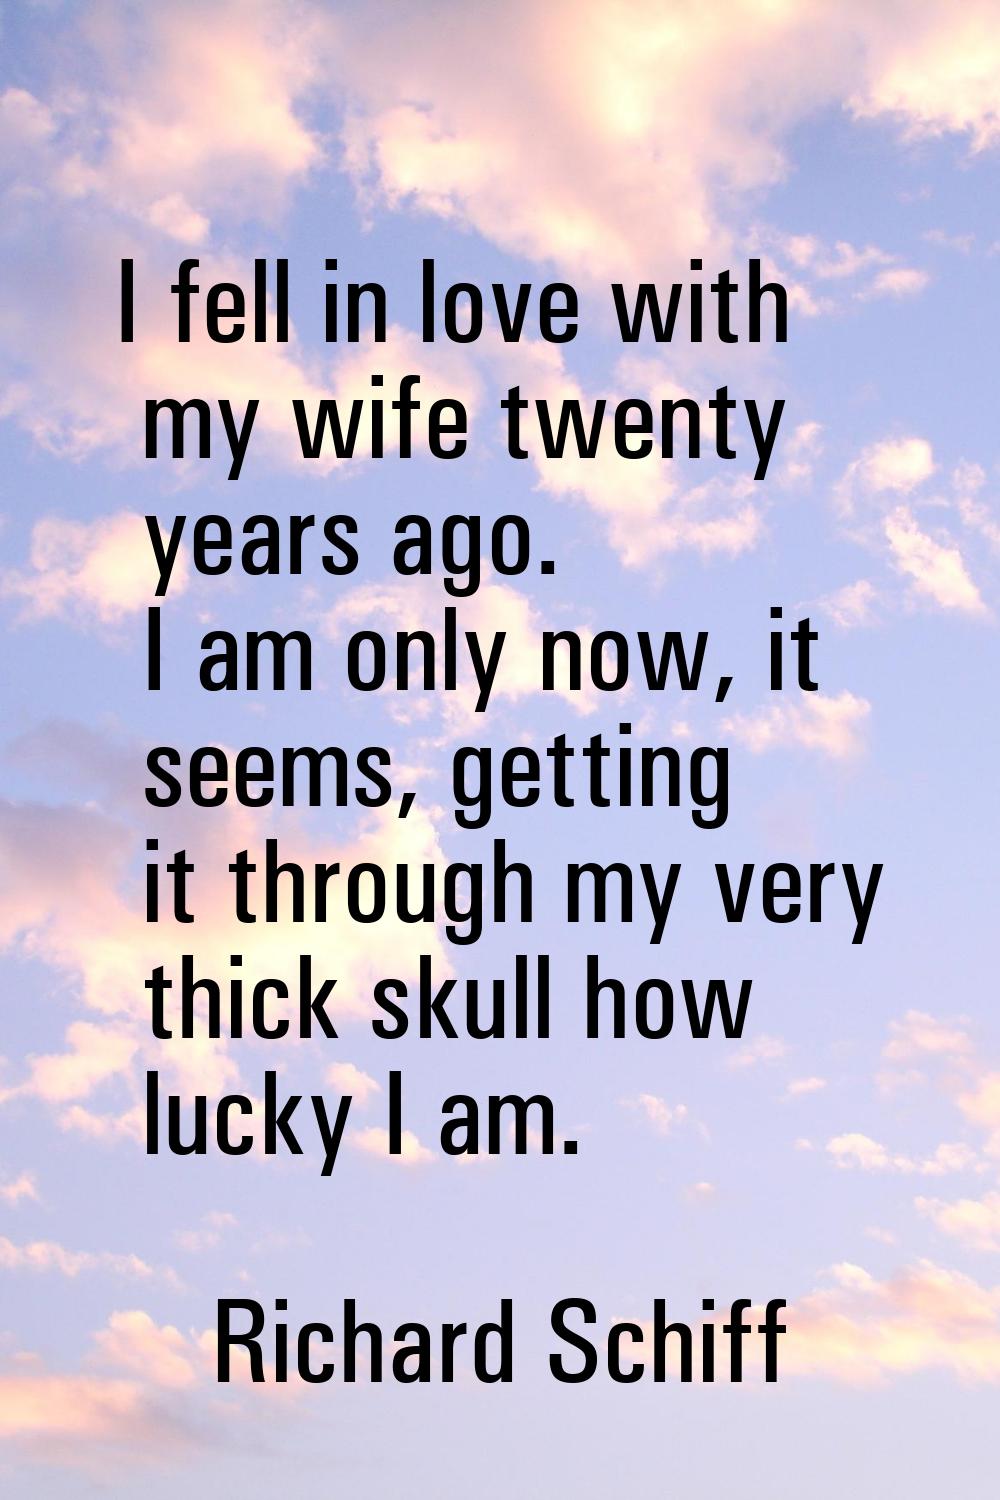 I fell in love with my wife twenty years ago. I am only now, it seems, getting it through my very t